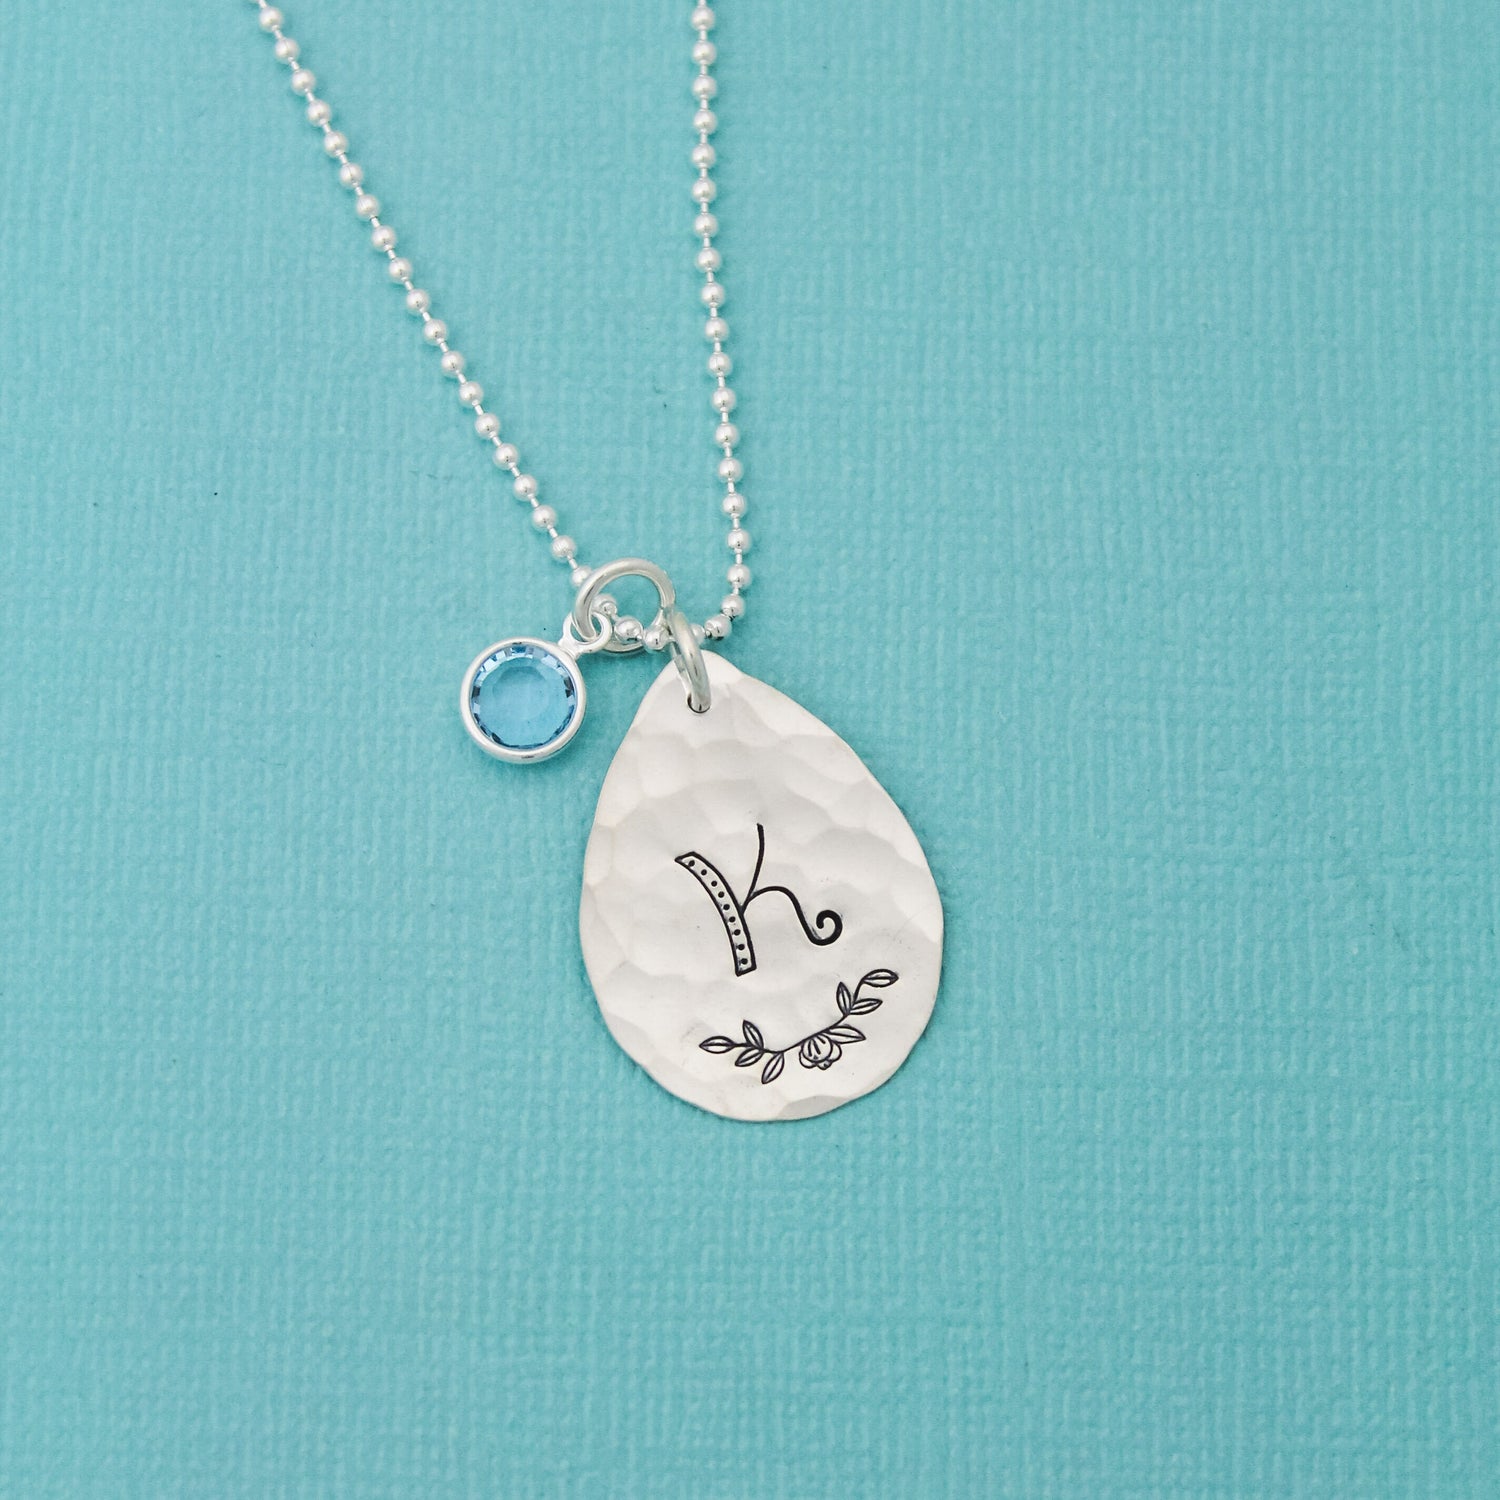 Sterling Silver Teardrop Initial Necklace with Birthstone Crystal Charm Bridesmaid Hand Stamped Jewelry, Unique Hand Stamped Initial Jewelry